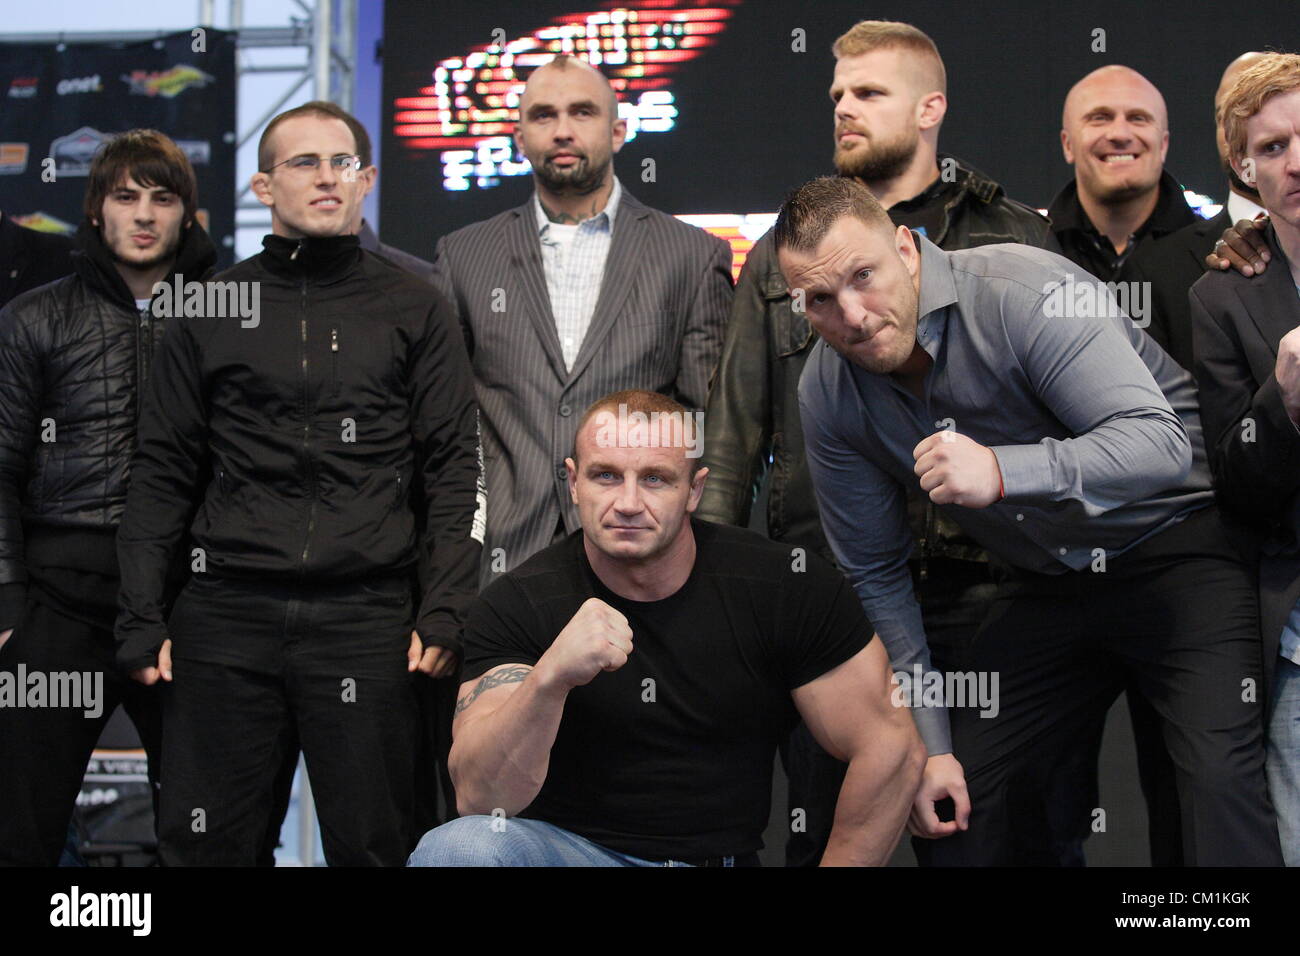 Sopot, Poland 14th, September 2012 Official weighted ceremony before ' KSW 20  - Martial Arts Confrontation 20 '  which will take place on 15th September in Sopot. MMA fighter Mariusz Pudzianowski (C) during the ceremony Stock Photo